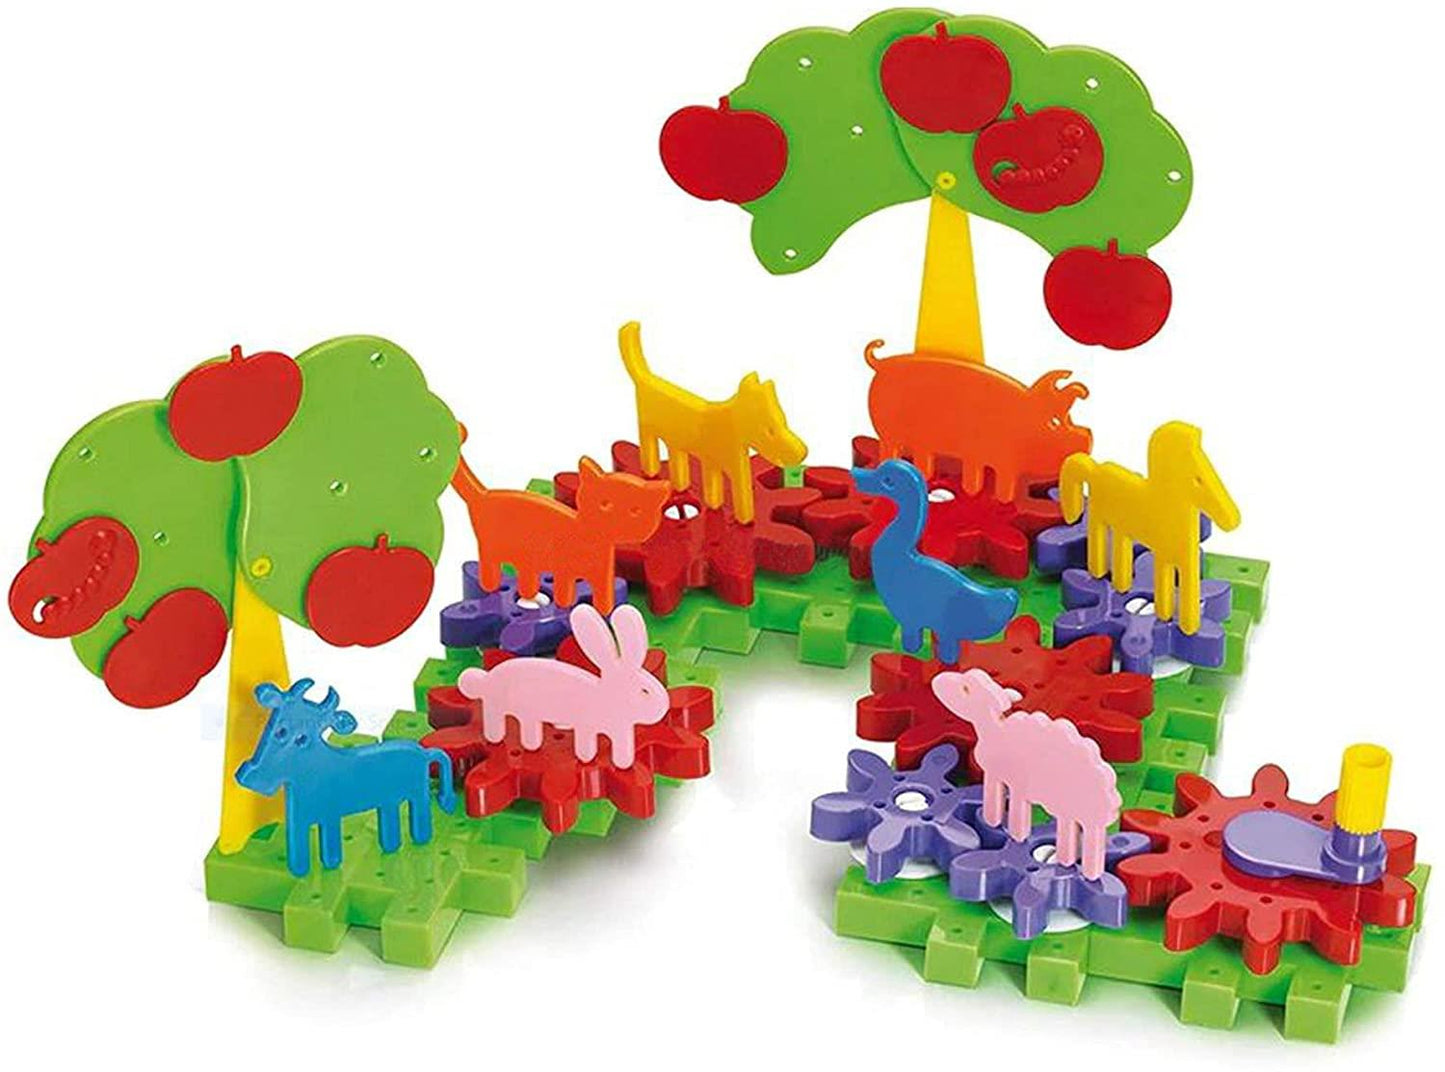 62 PCS Farm Spinning Educational Set Build & Spin by The Magic Toy Shop - UKBuyZone